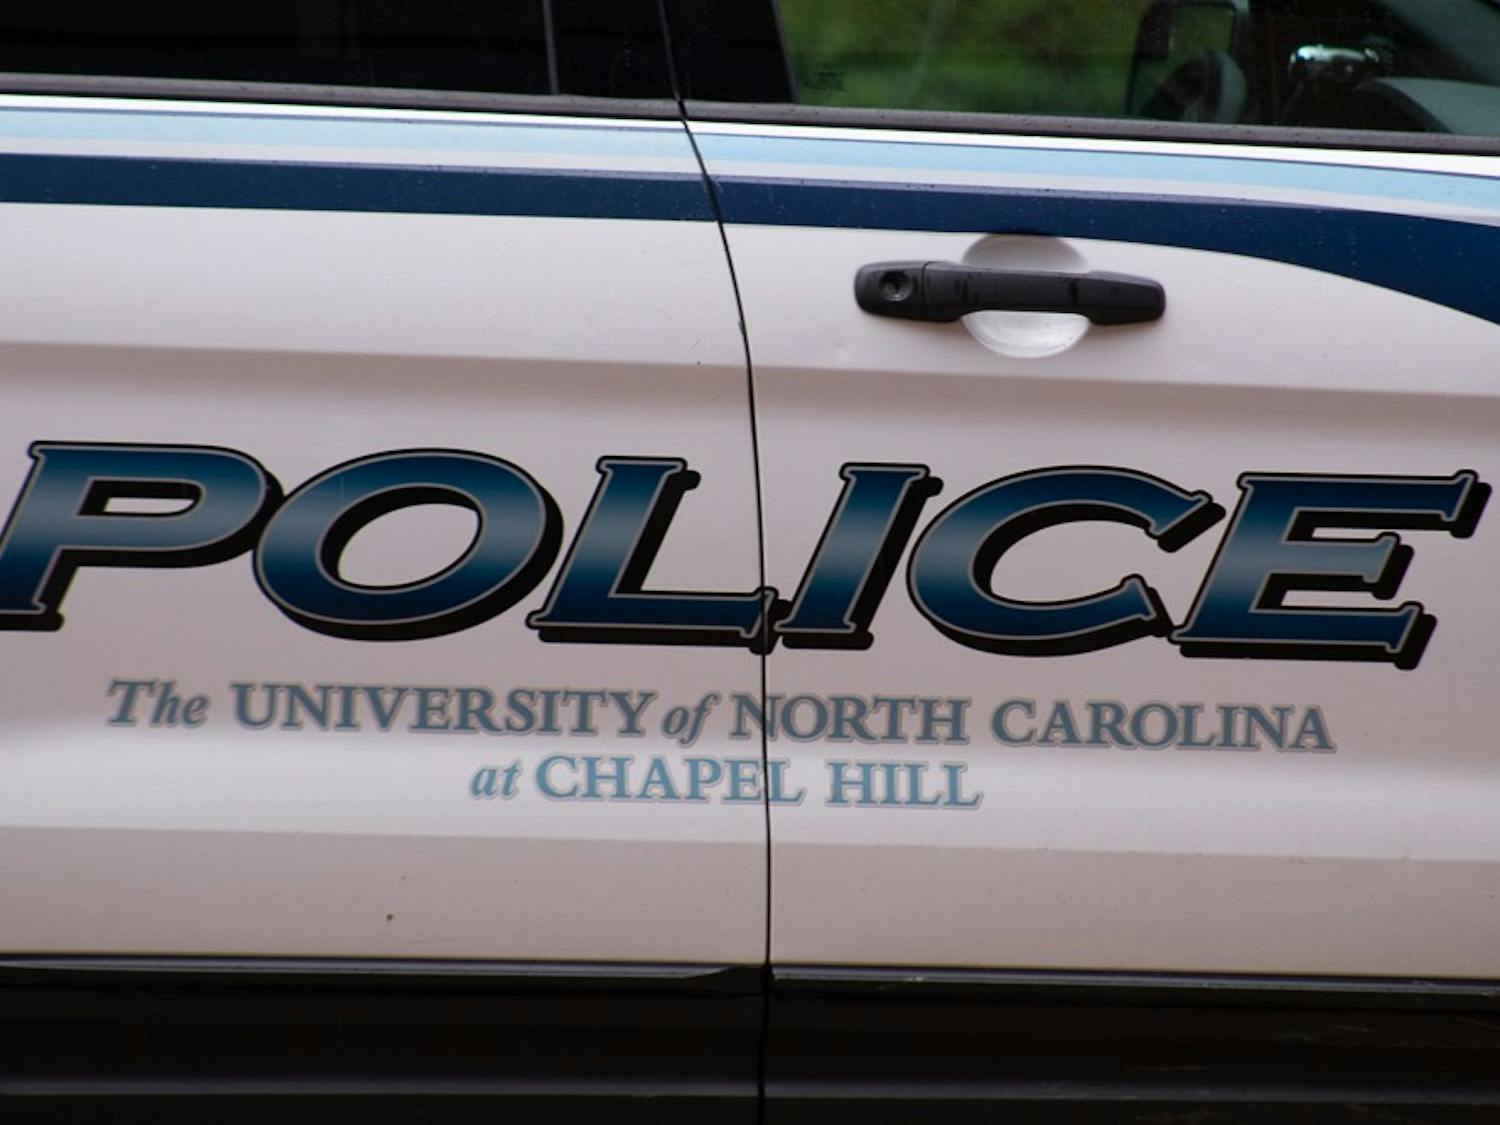 A UNC Chapel Hill police car parked on campus on Thursday, Aug. 6, 2020.